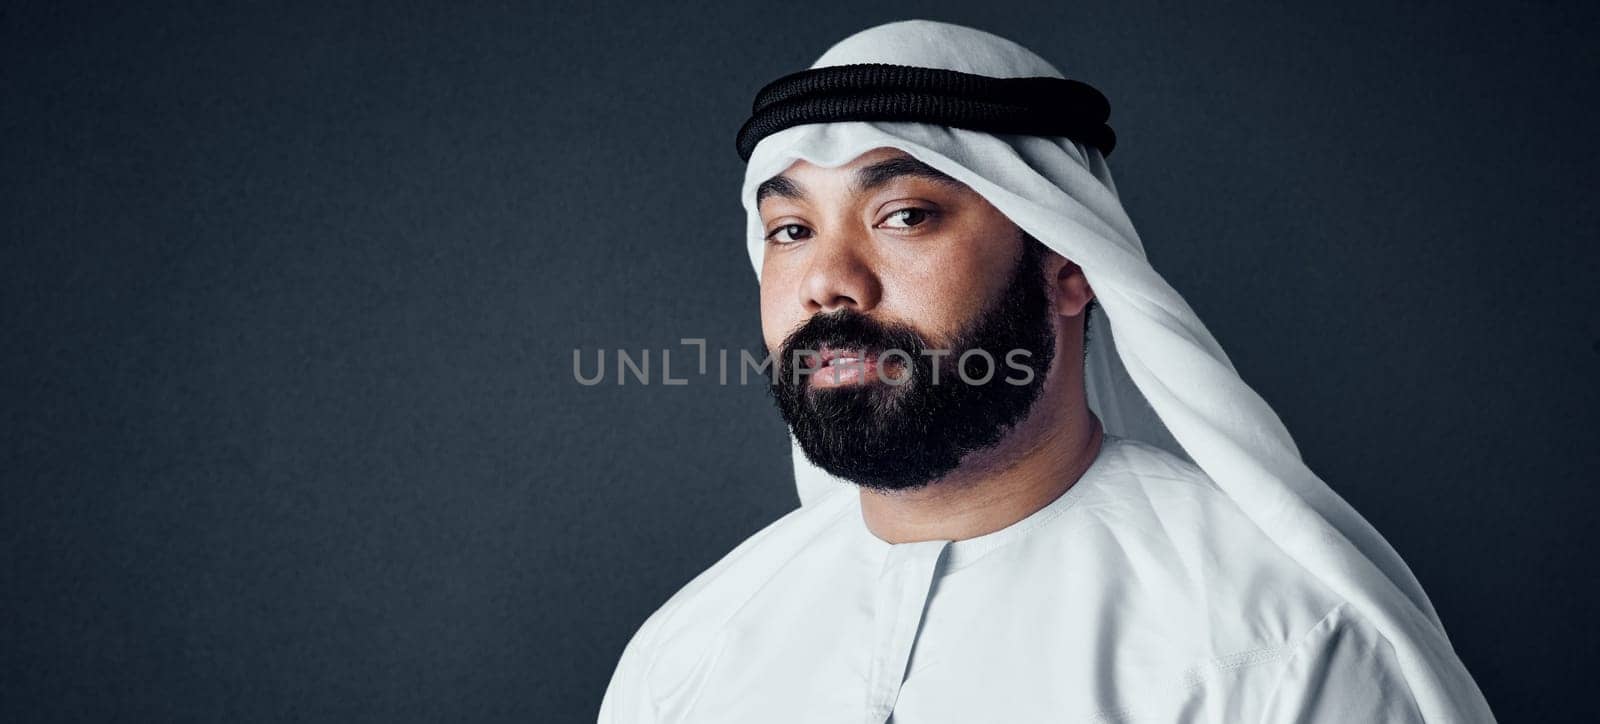 He loves the traditional look. Studio shot of a young man dressed in Islamic traditional clothing posing against a dark background. by YuriArcurs